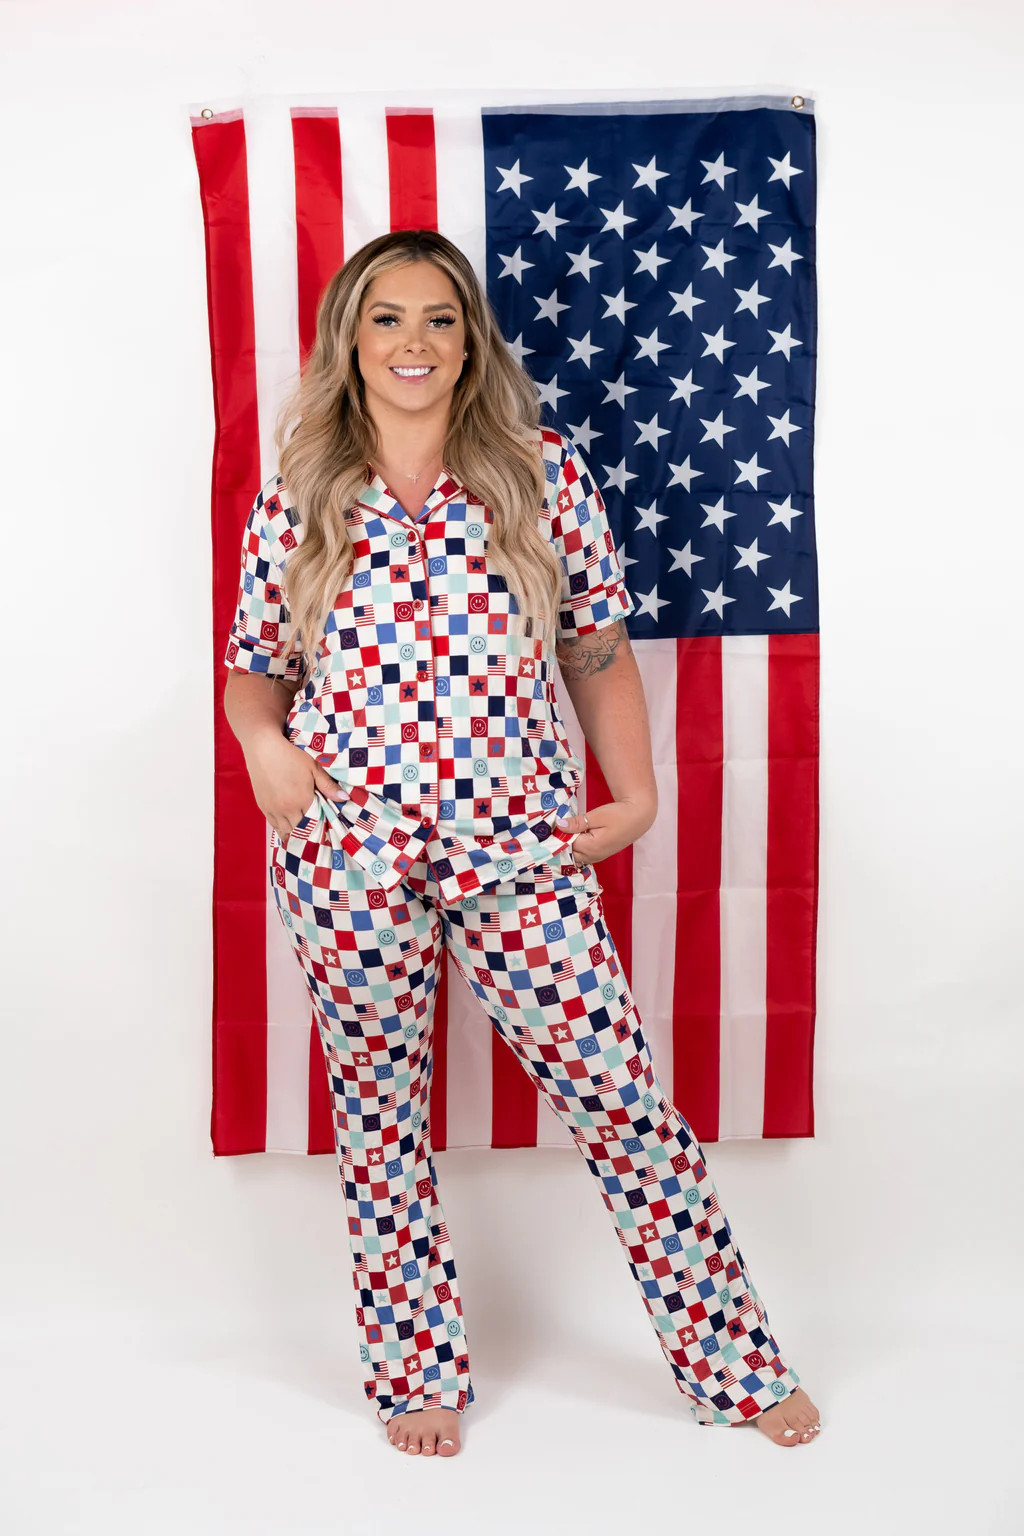 HOME OF THE FREE CHECKERS WOMEN’S RELAXED FLARE DREAM SET | DREAM BIG LITTLE CO